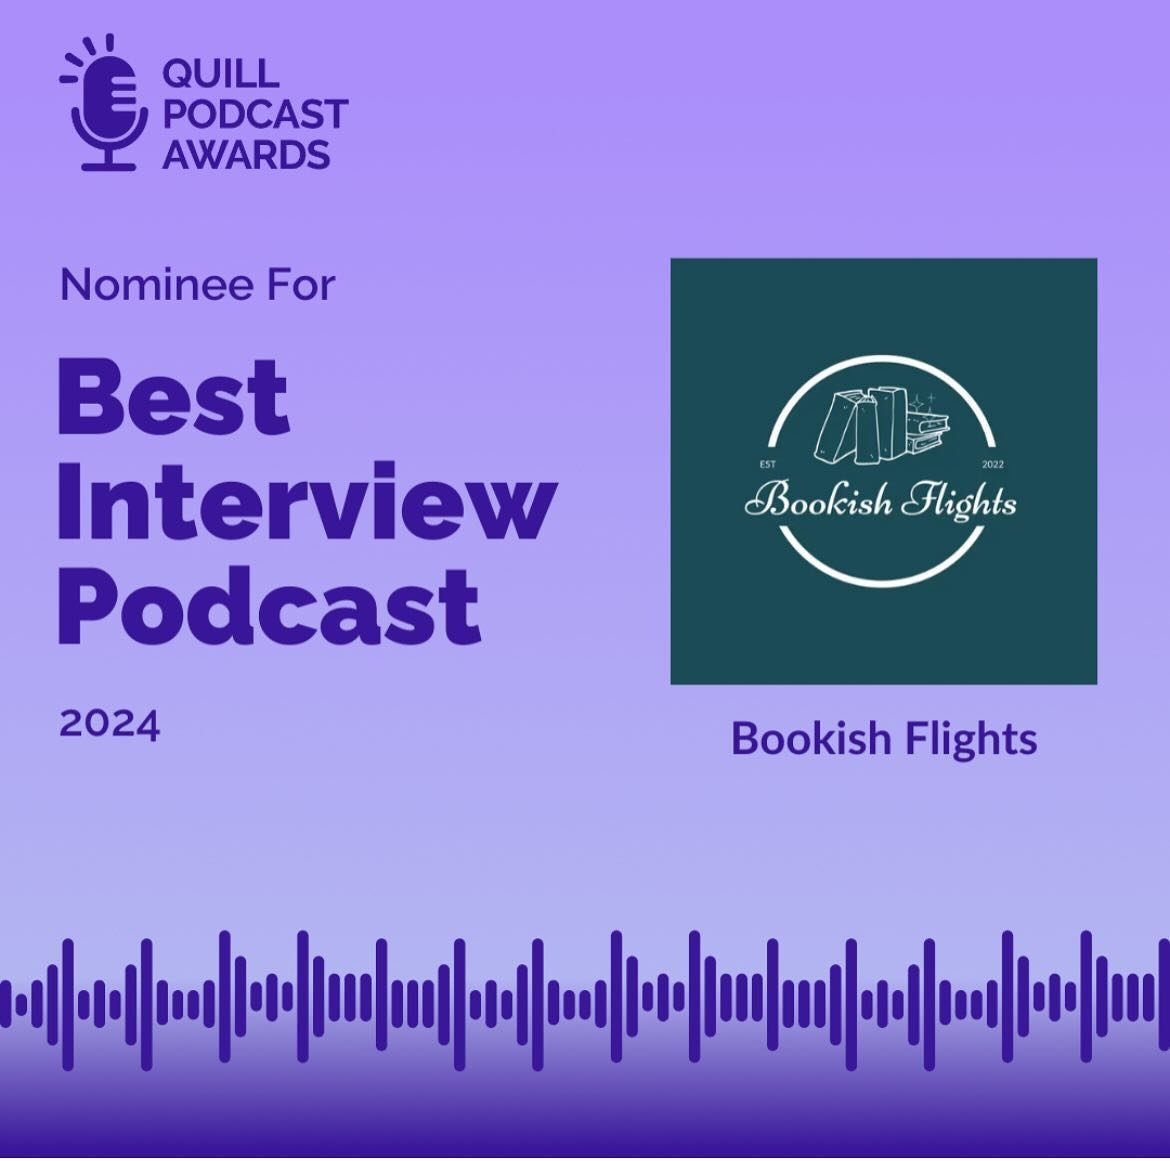 Ahhhhh! You all helped Bookish Flights make the top 3 finalists for Best Interview Podcast of the Year!!! My eyes are glistening 🥹 

Thank you, thank you, thank you for your support and nominations, as well as tuning in. I absolutely adore interview